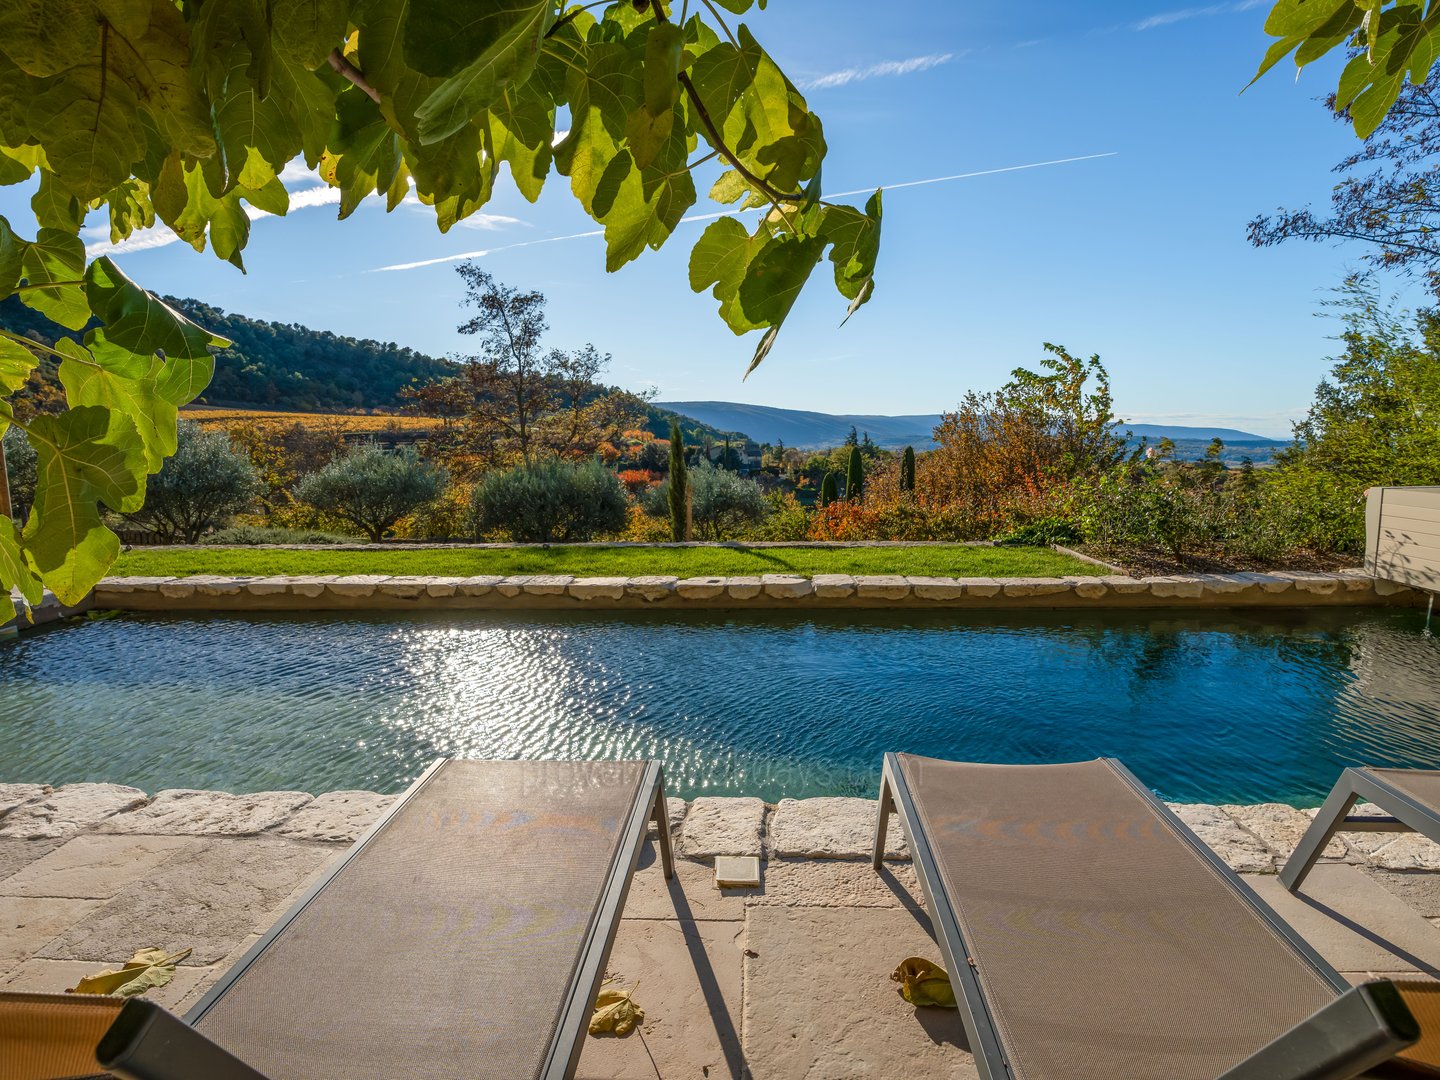 18th century Bastide with views of Luberon for sale - Bonnieux - 18